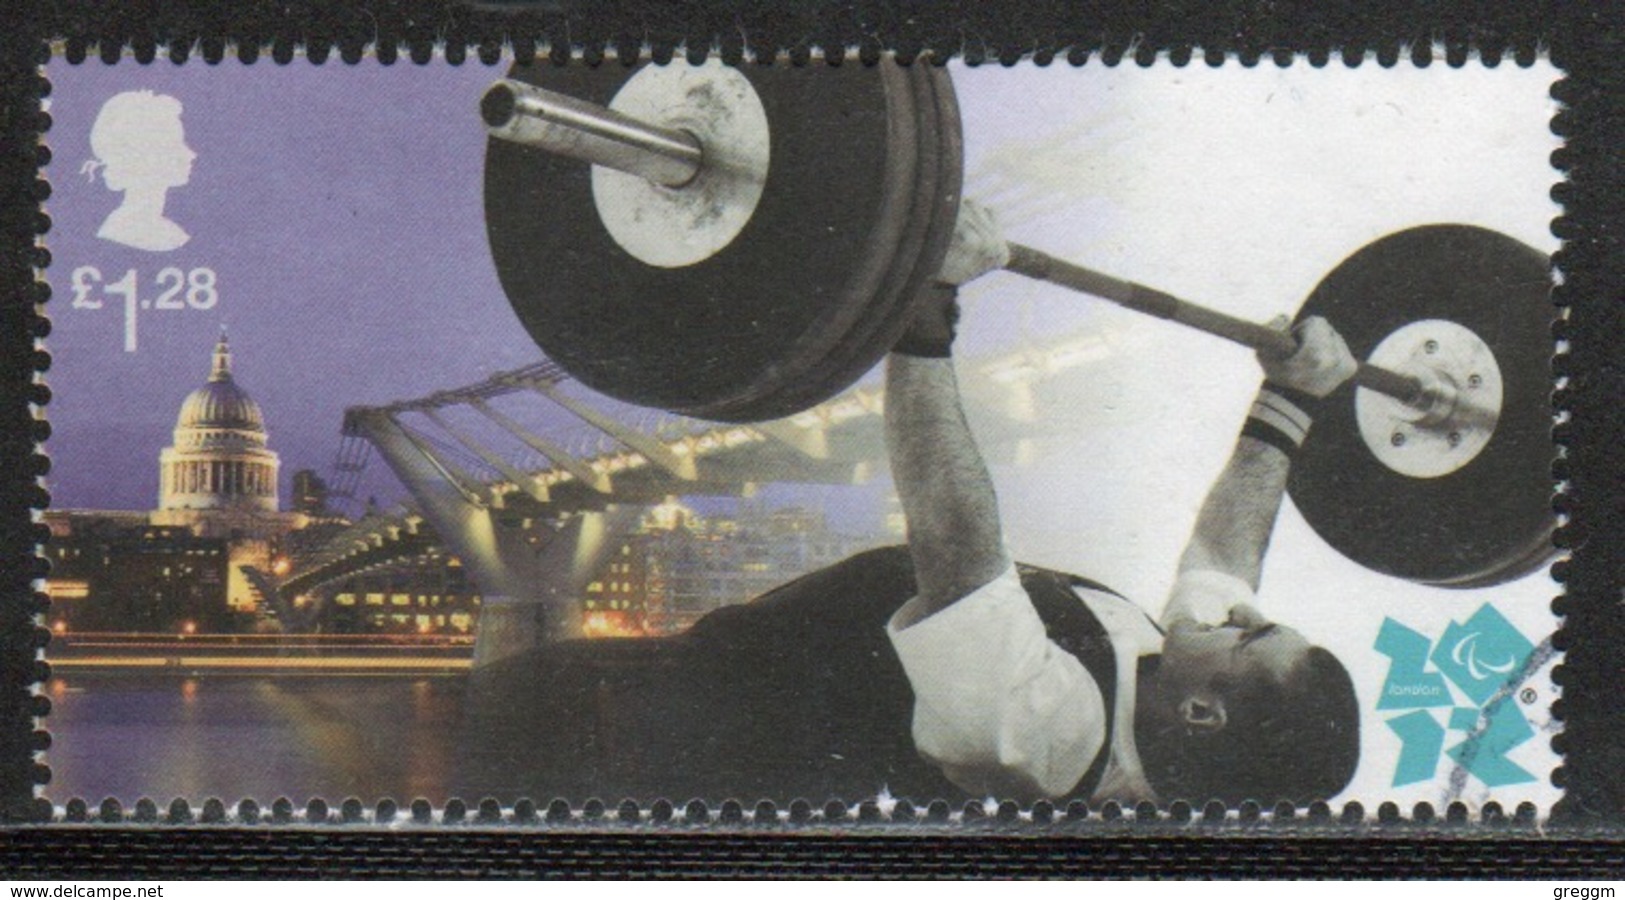 Great Britain 2012 Single £1.28 Stamp From The Welcome To London Paralympic Games Mini Sheet. - Used Stamps